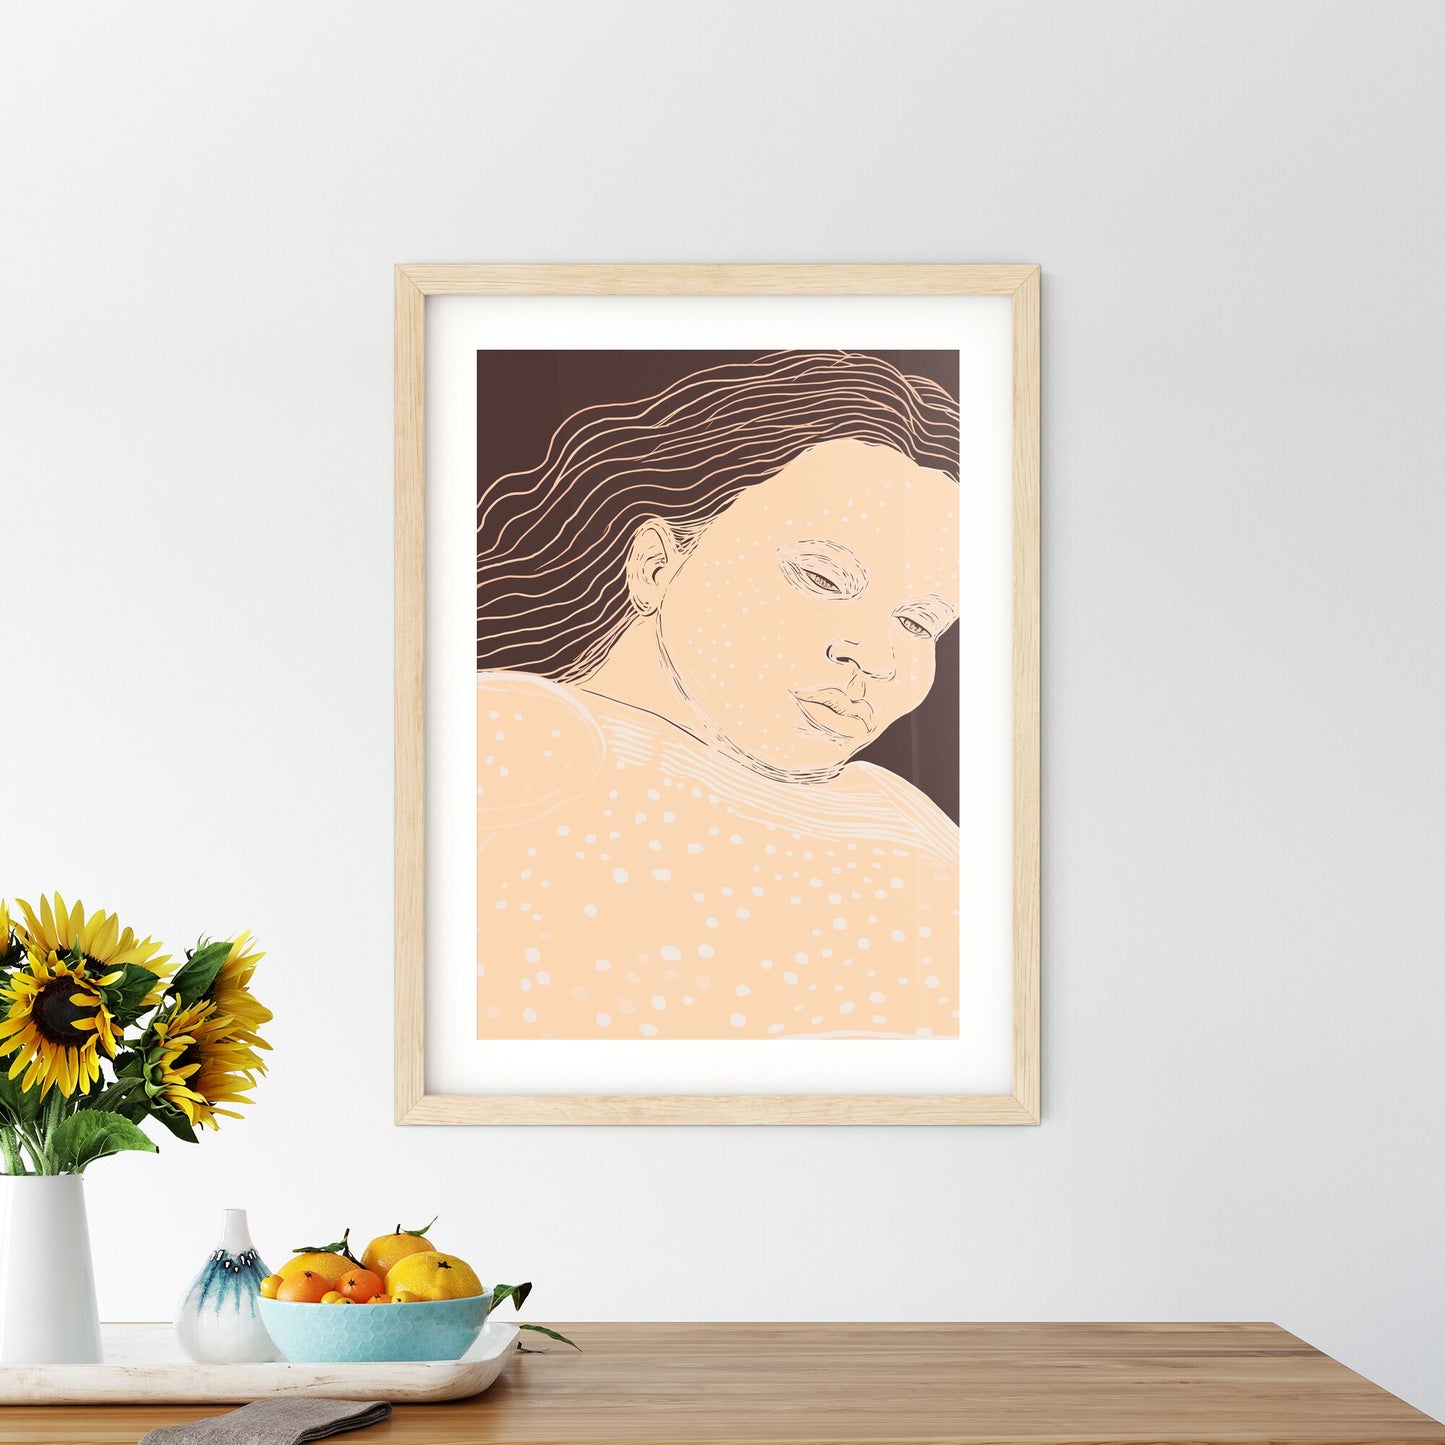 Pregnant Woman - A Drawing Of A Woman With Long Hair Default Title